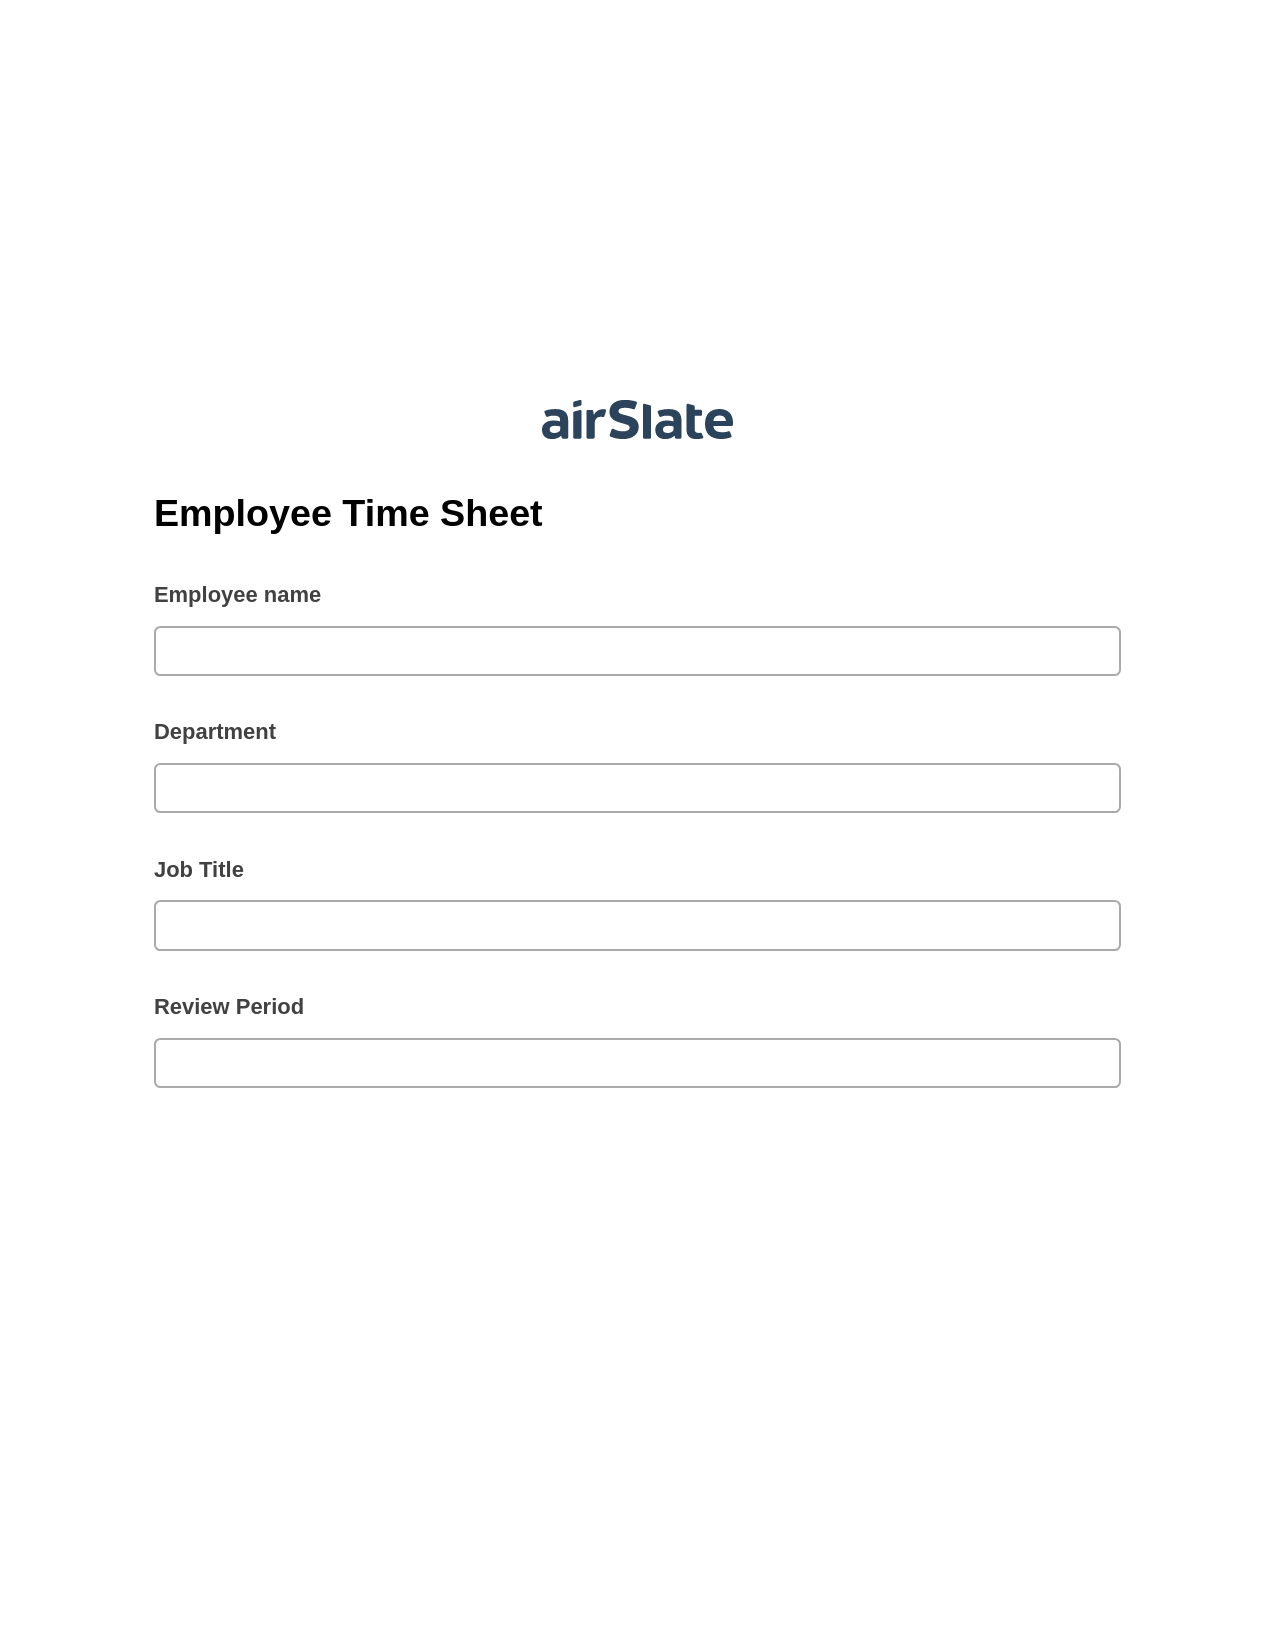 Multirole Employee Time Sheet Pre-fill Document Bot, Create Salesforce Records Bot, Archive to Google Drive Bot